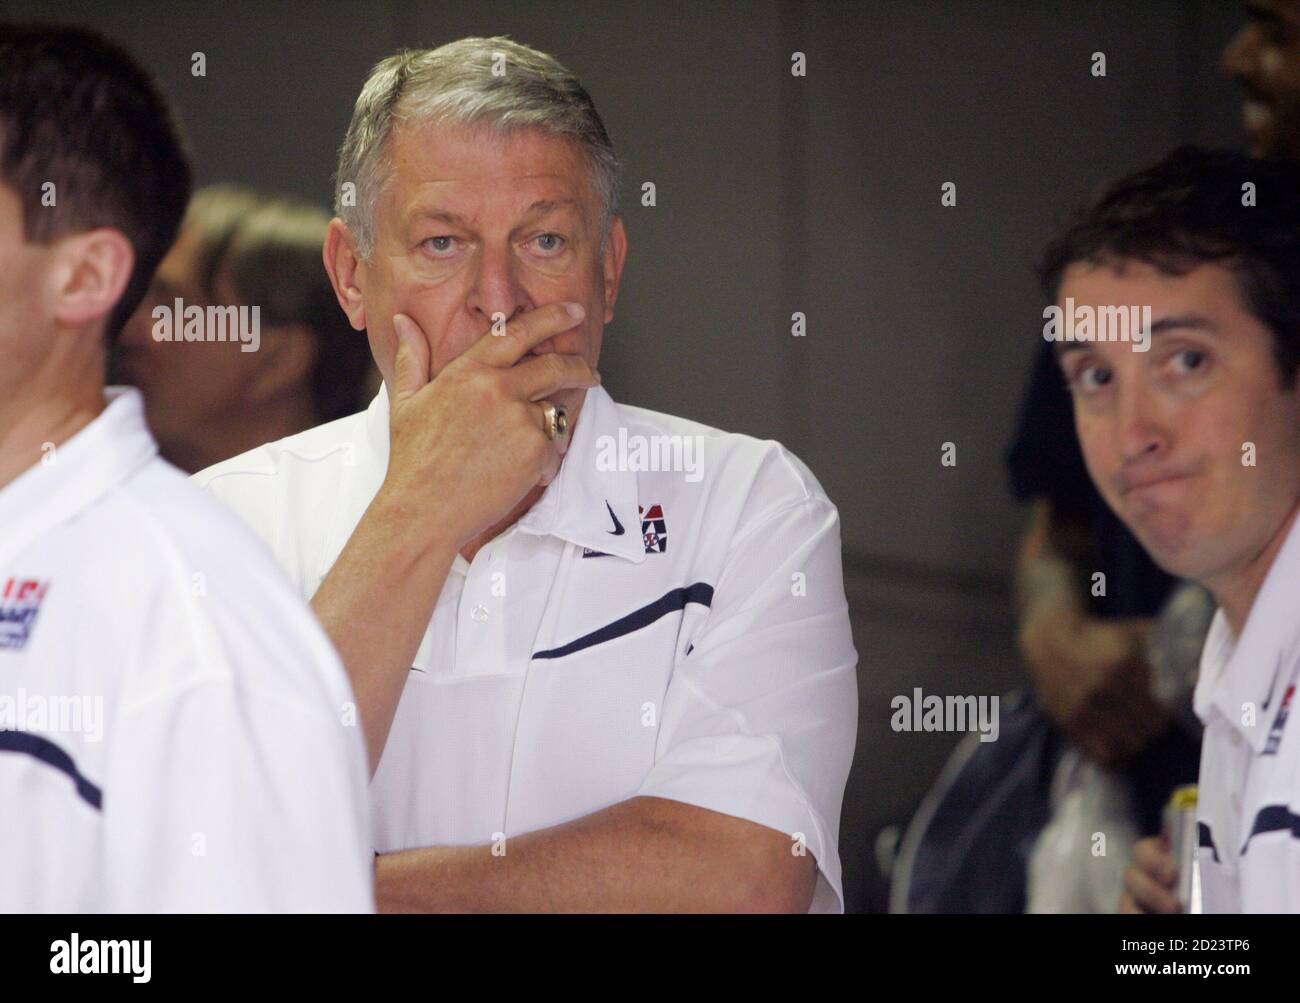 Senior Team Managing Director Jerry Colangelo attends a training camp with the USA Basketball Men's Senior National Team at the Cox Pavilion in Las Vegas, Nevada July 20, 2007. REUTERS/Steve Marcus (UNITED STATES) Stock Photo